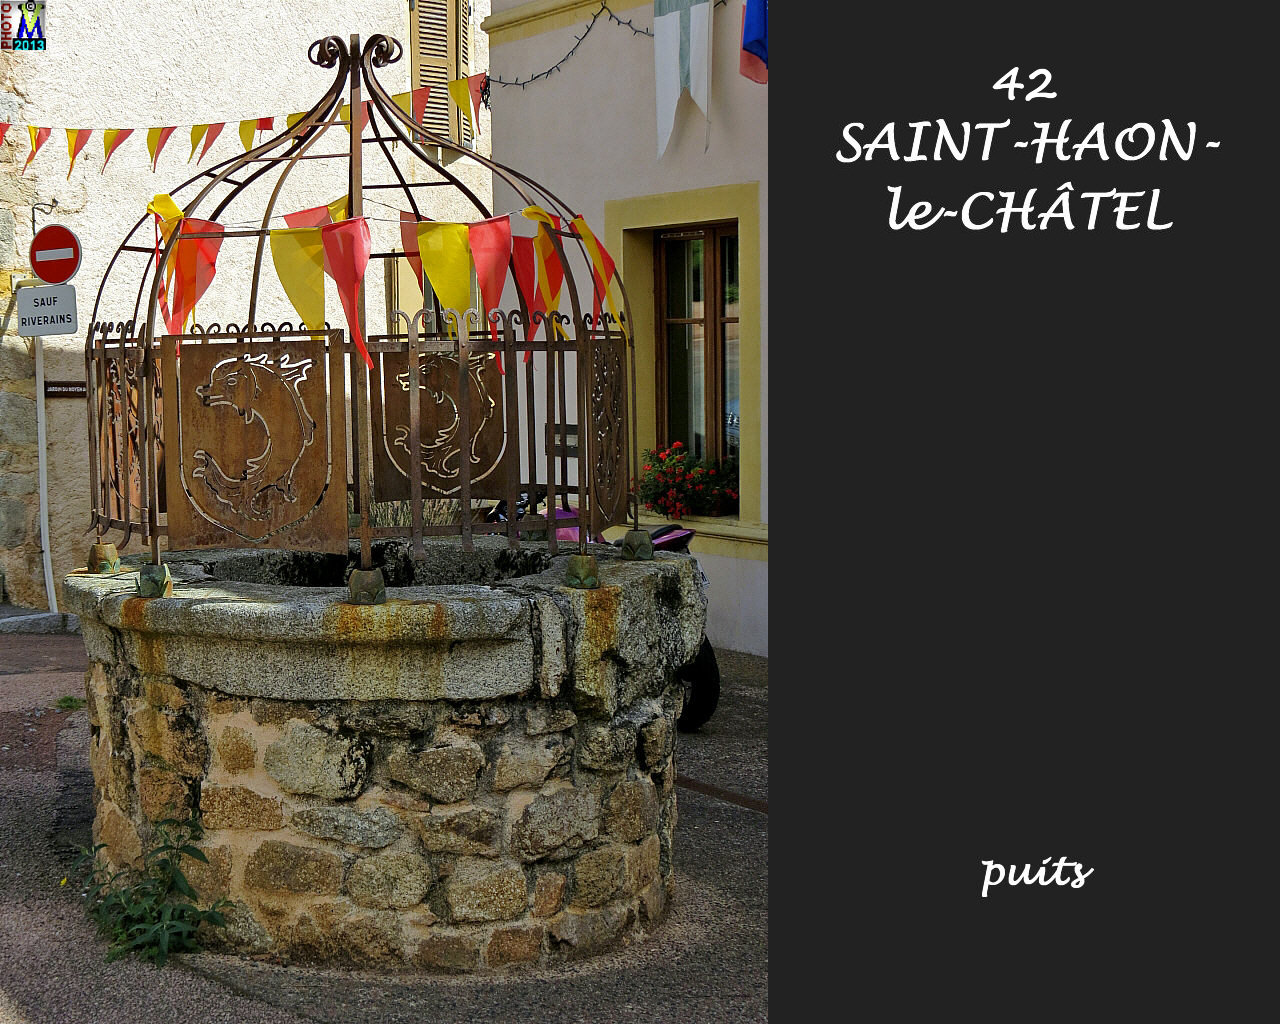 42StHAON-CHATEL_puits_100.jpg